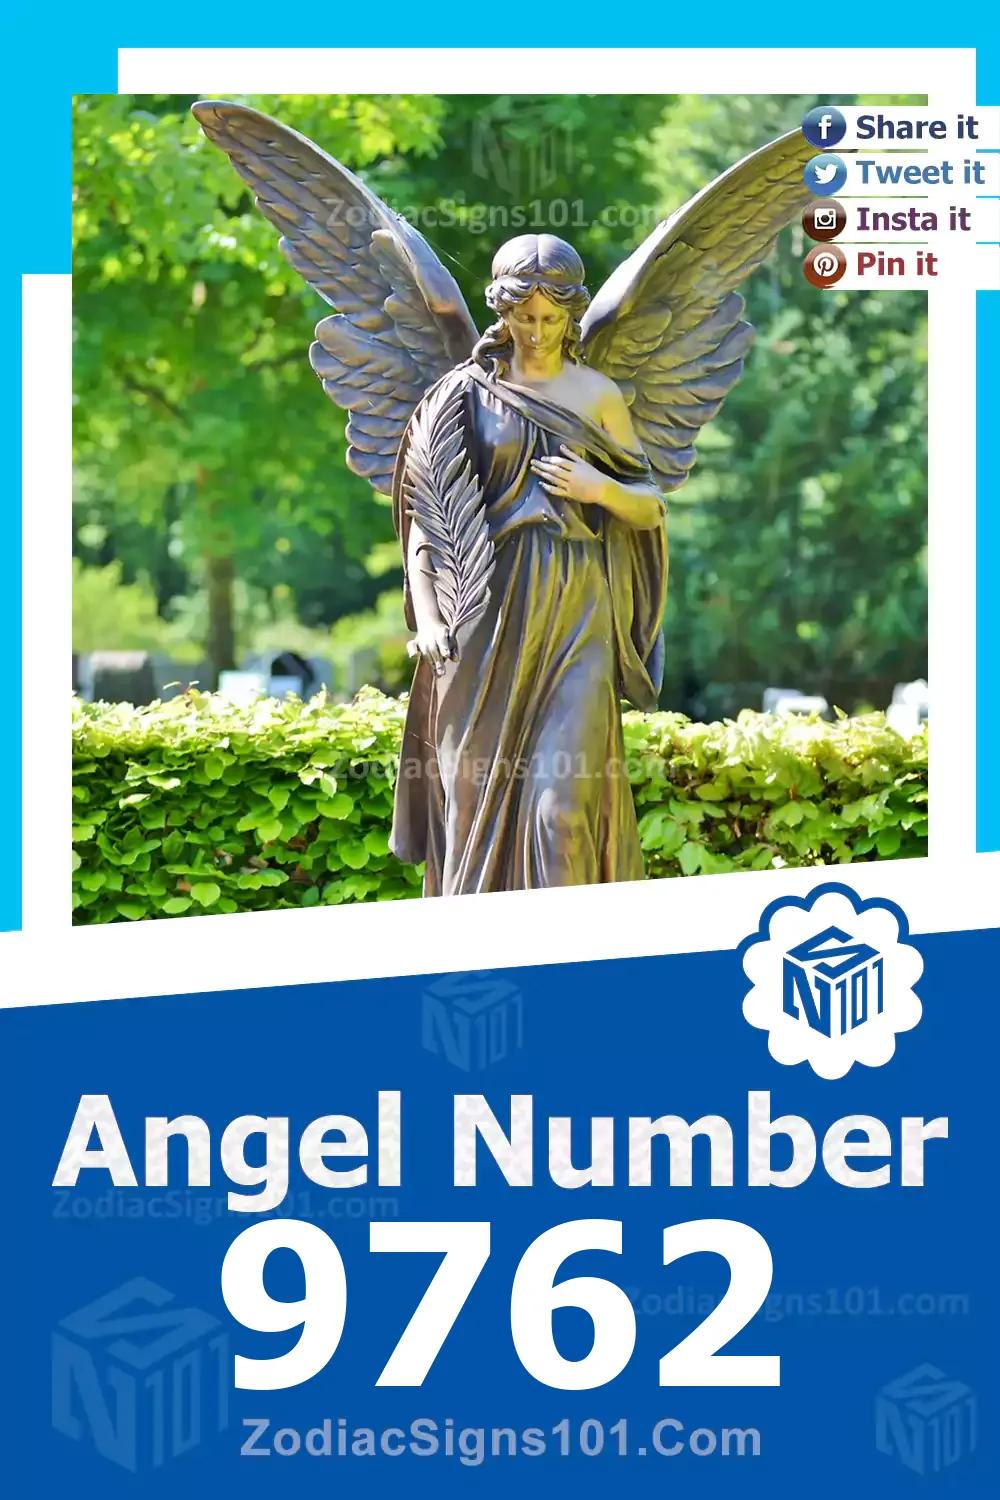 9762 Angel Number Meaning